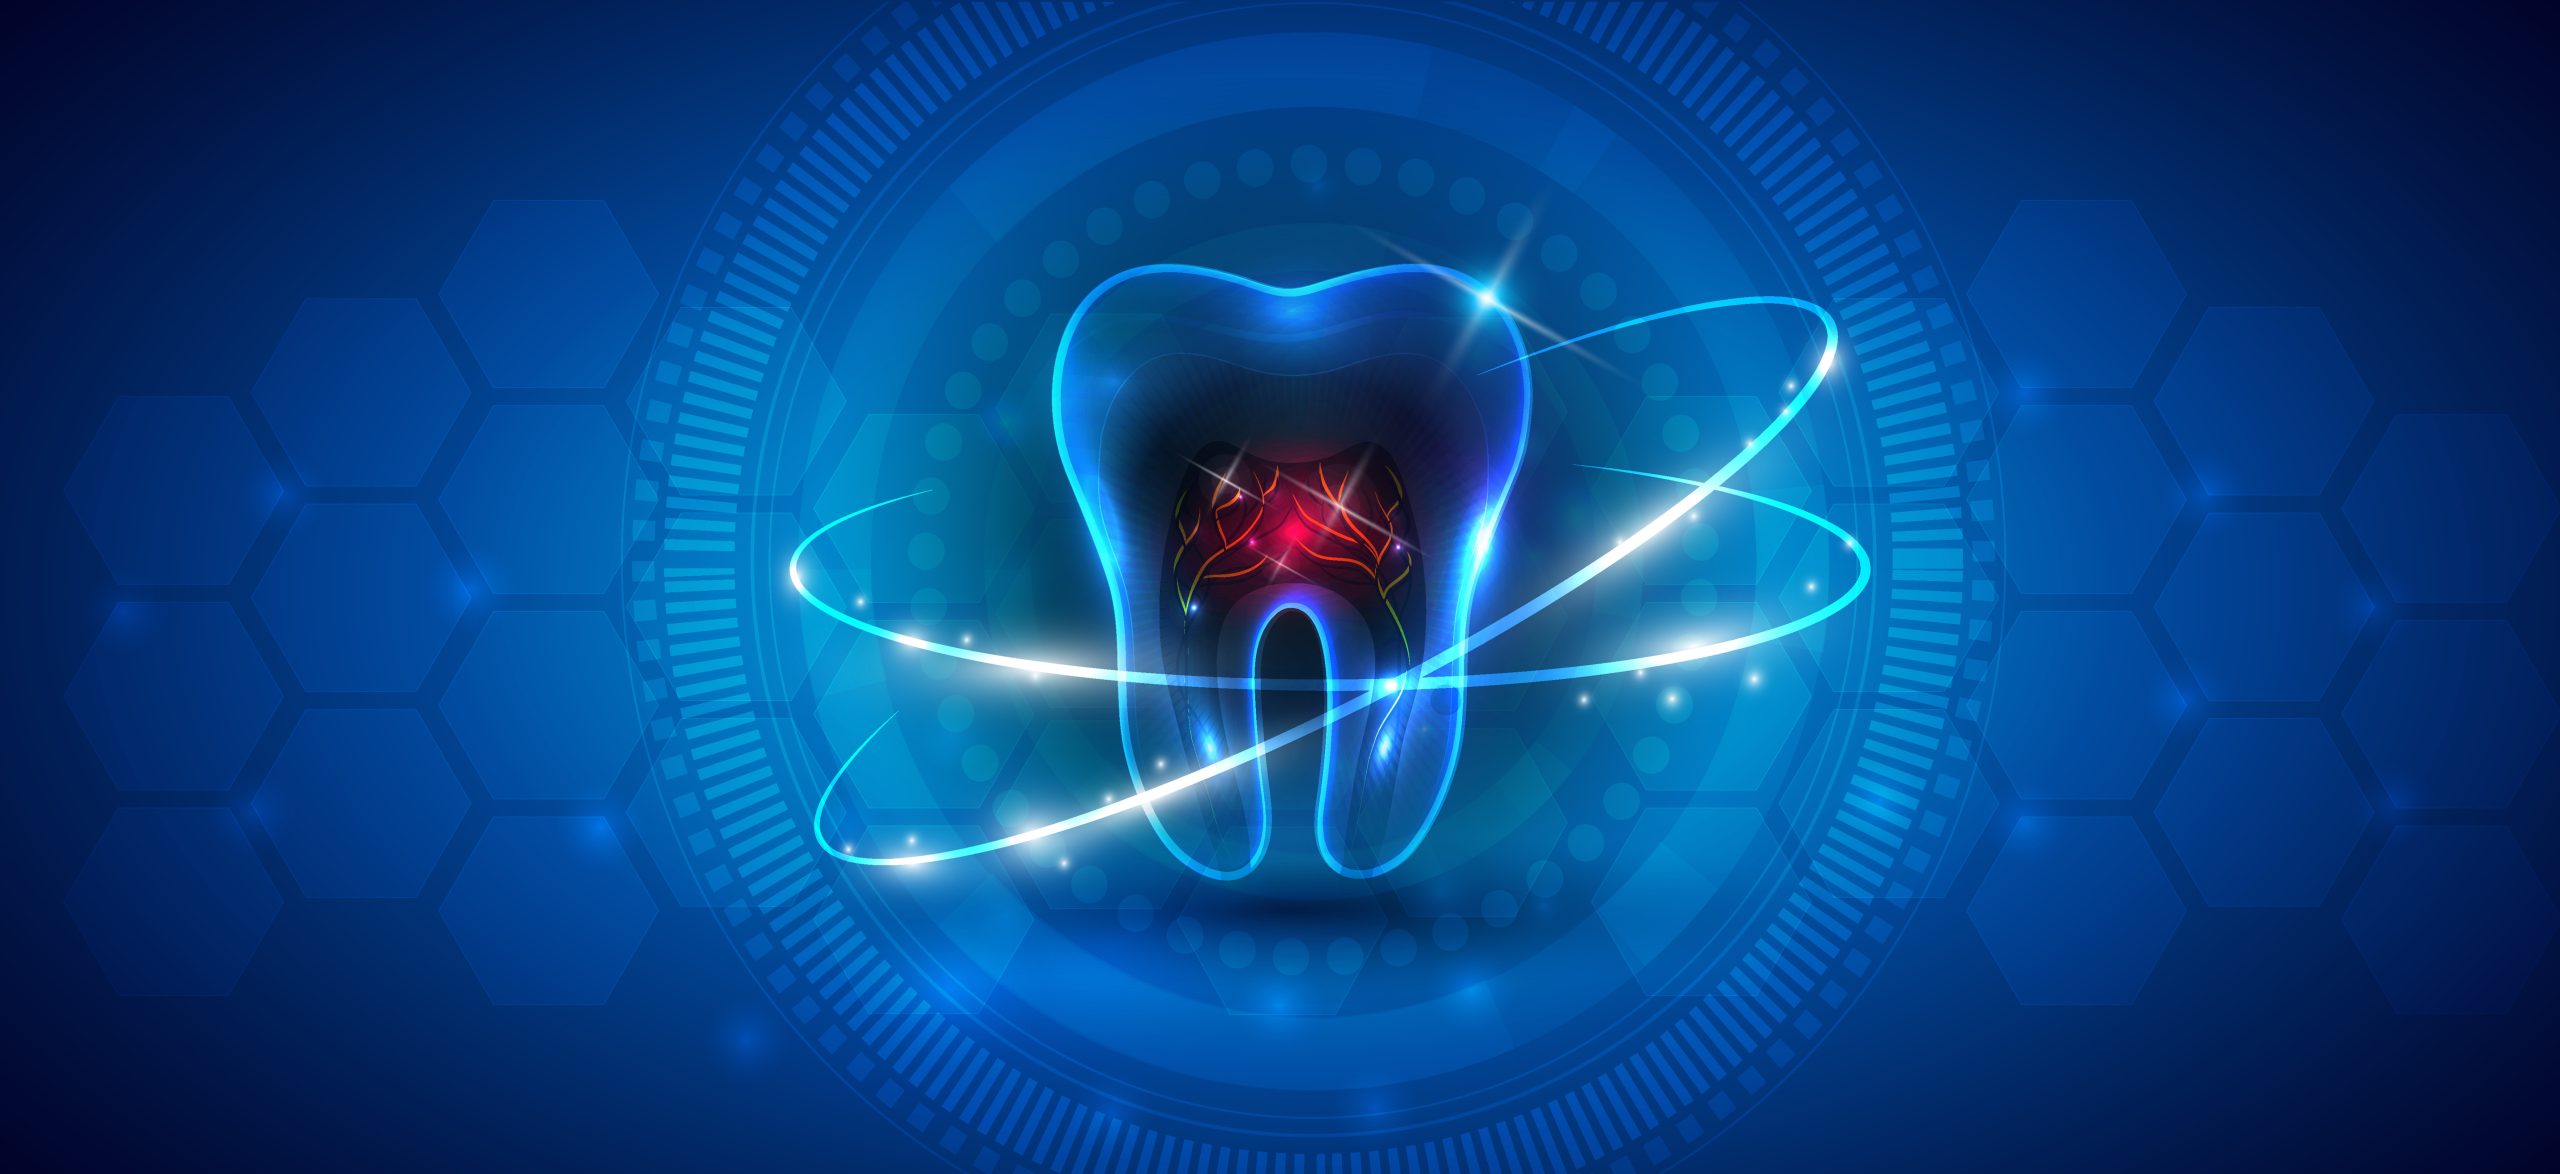 Healthy tooth icon abstract treatment concept on a beautiful blue background